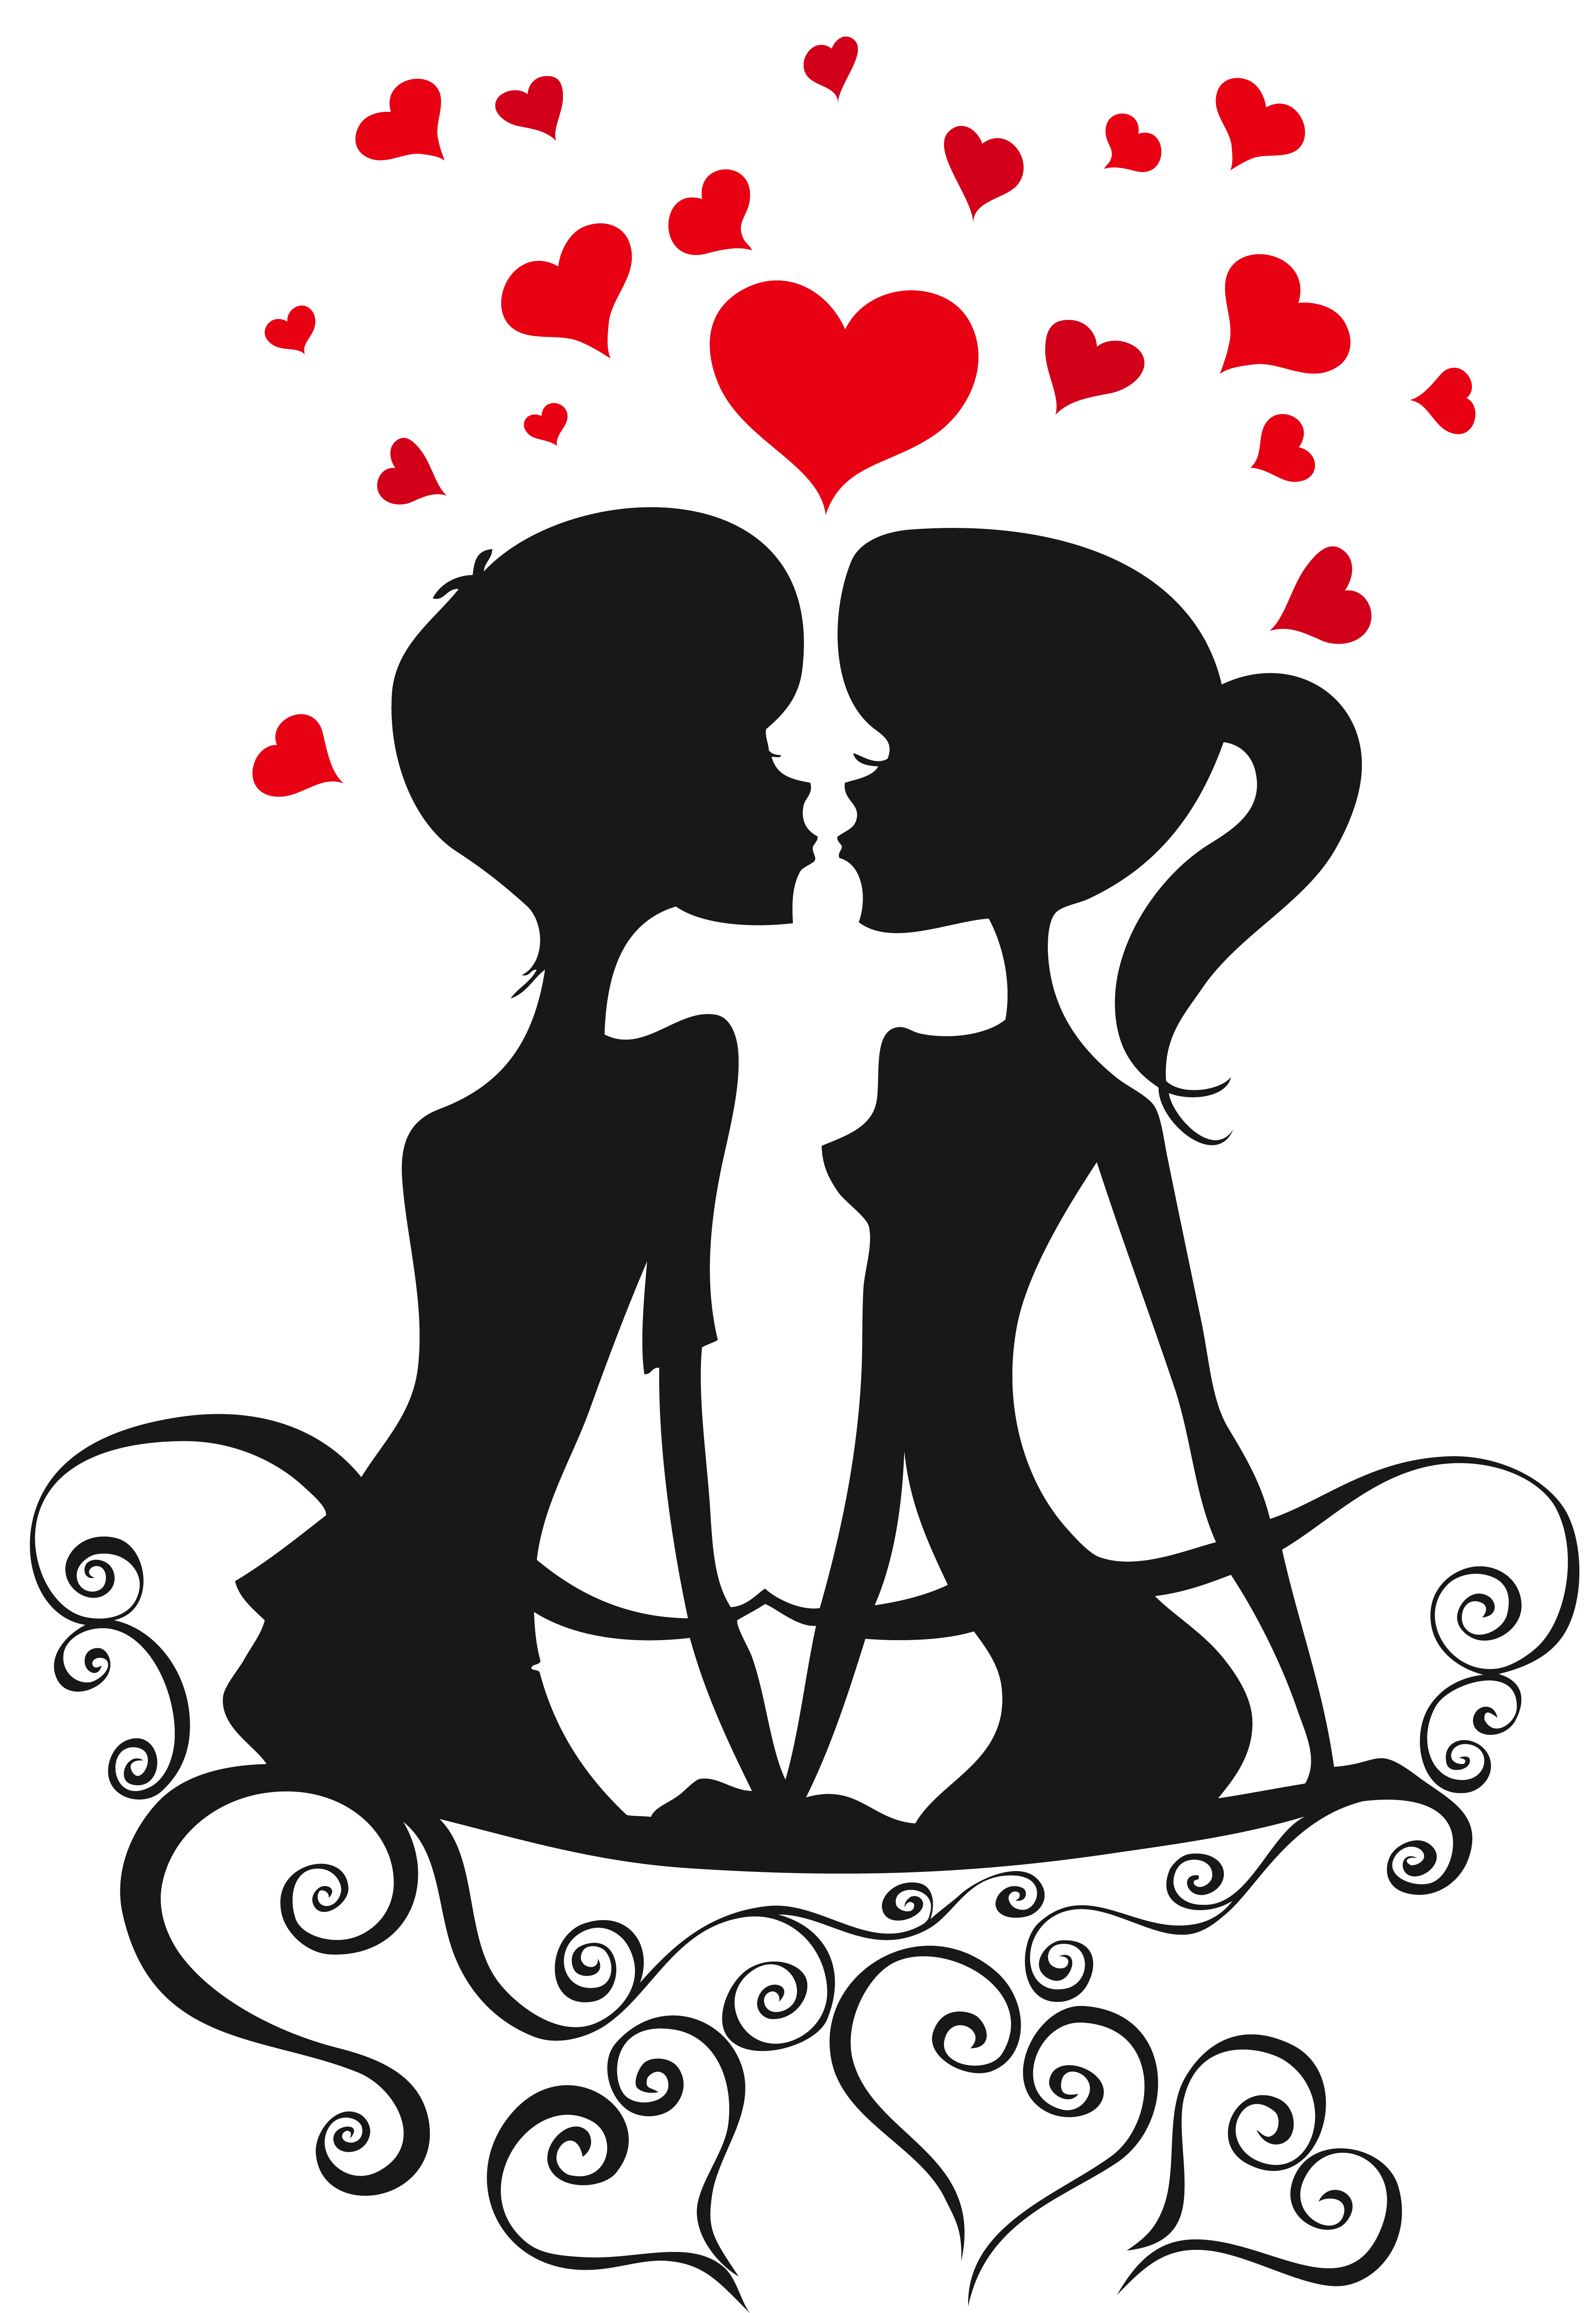 Love couple silhouettes on. Bench clipart silhouette